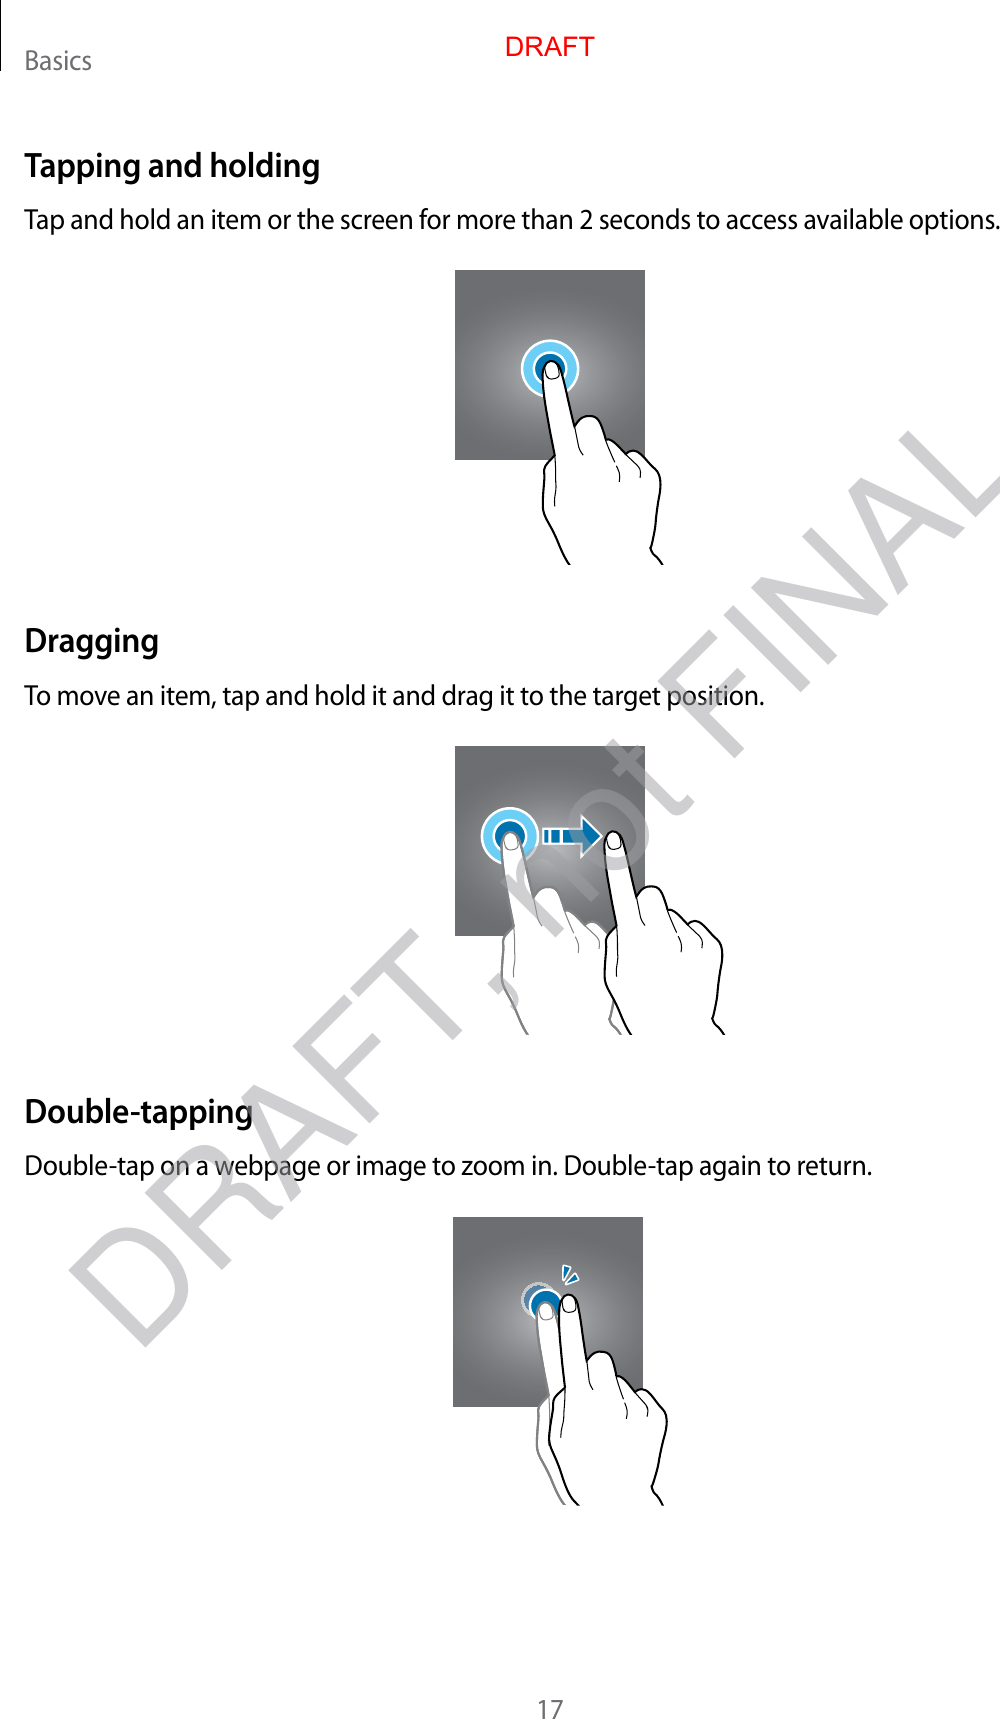 Basics17Tapping and holdingTap and hold an item or the screen for more than 2 seconds to access available options.DraggingTo move an item, tap and hold it and drag it to the target position.Double-tappingDouble-tap on a webpage or image to zoom in. Double-tap again to return.DRAFTDRAFT, not FINAL